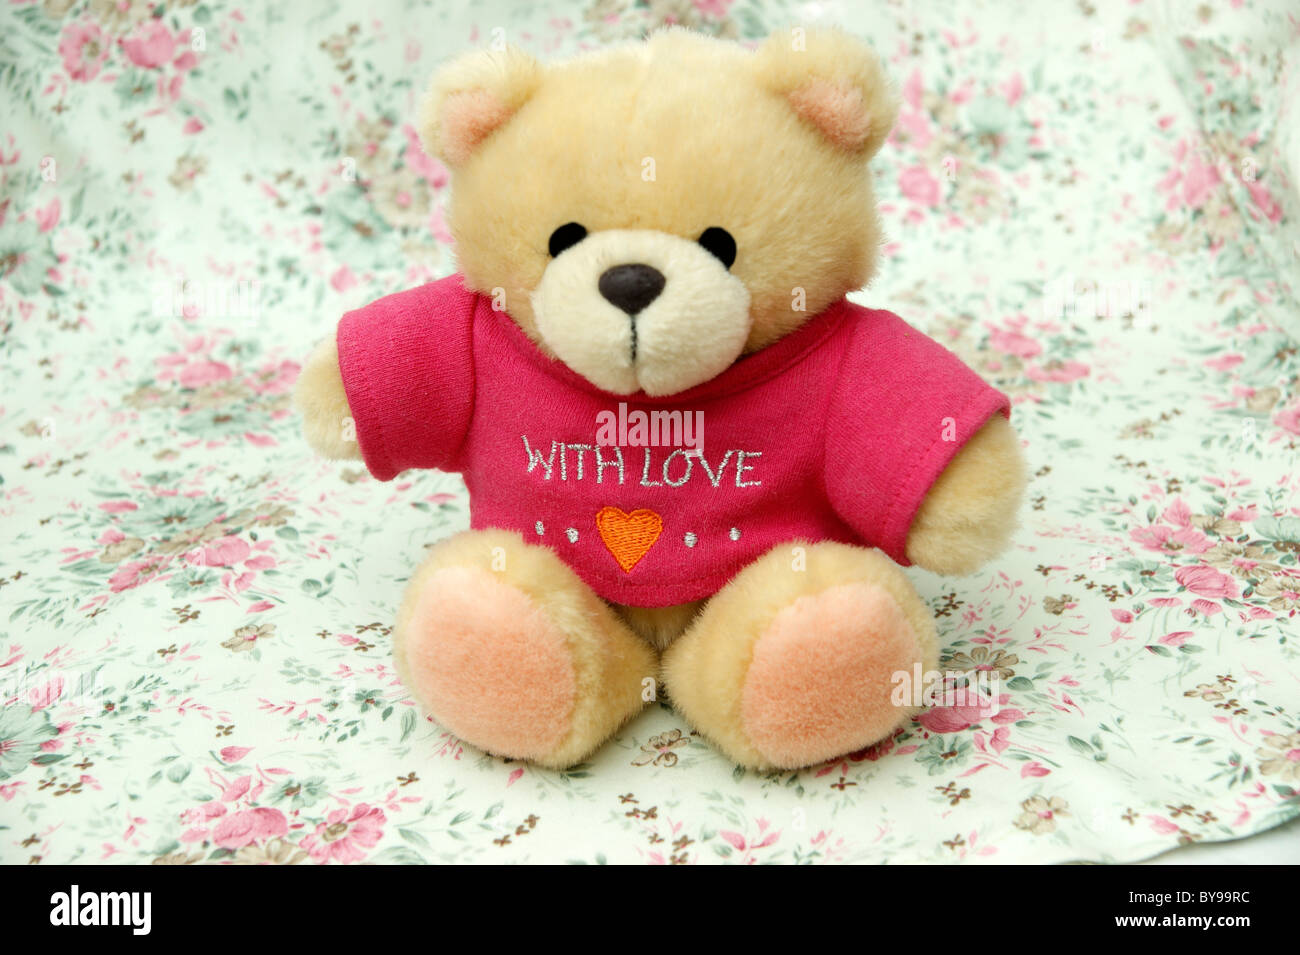 cute cuddly toy teddy bear with a message saying ''With love'' Stock Photo